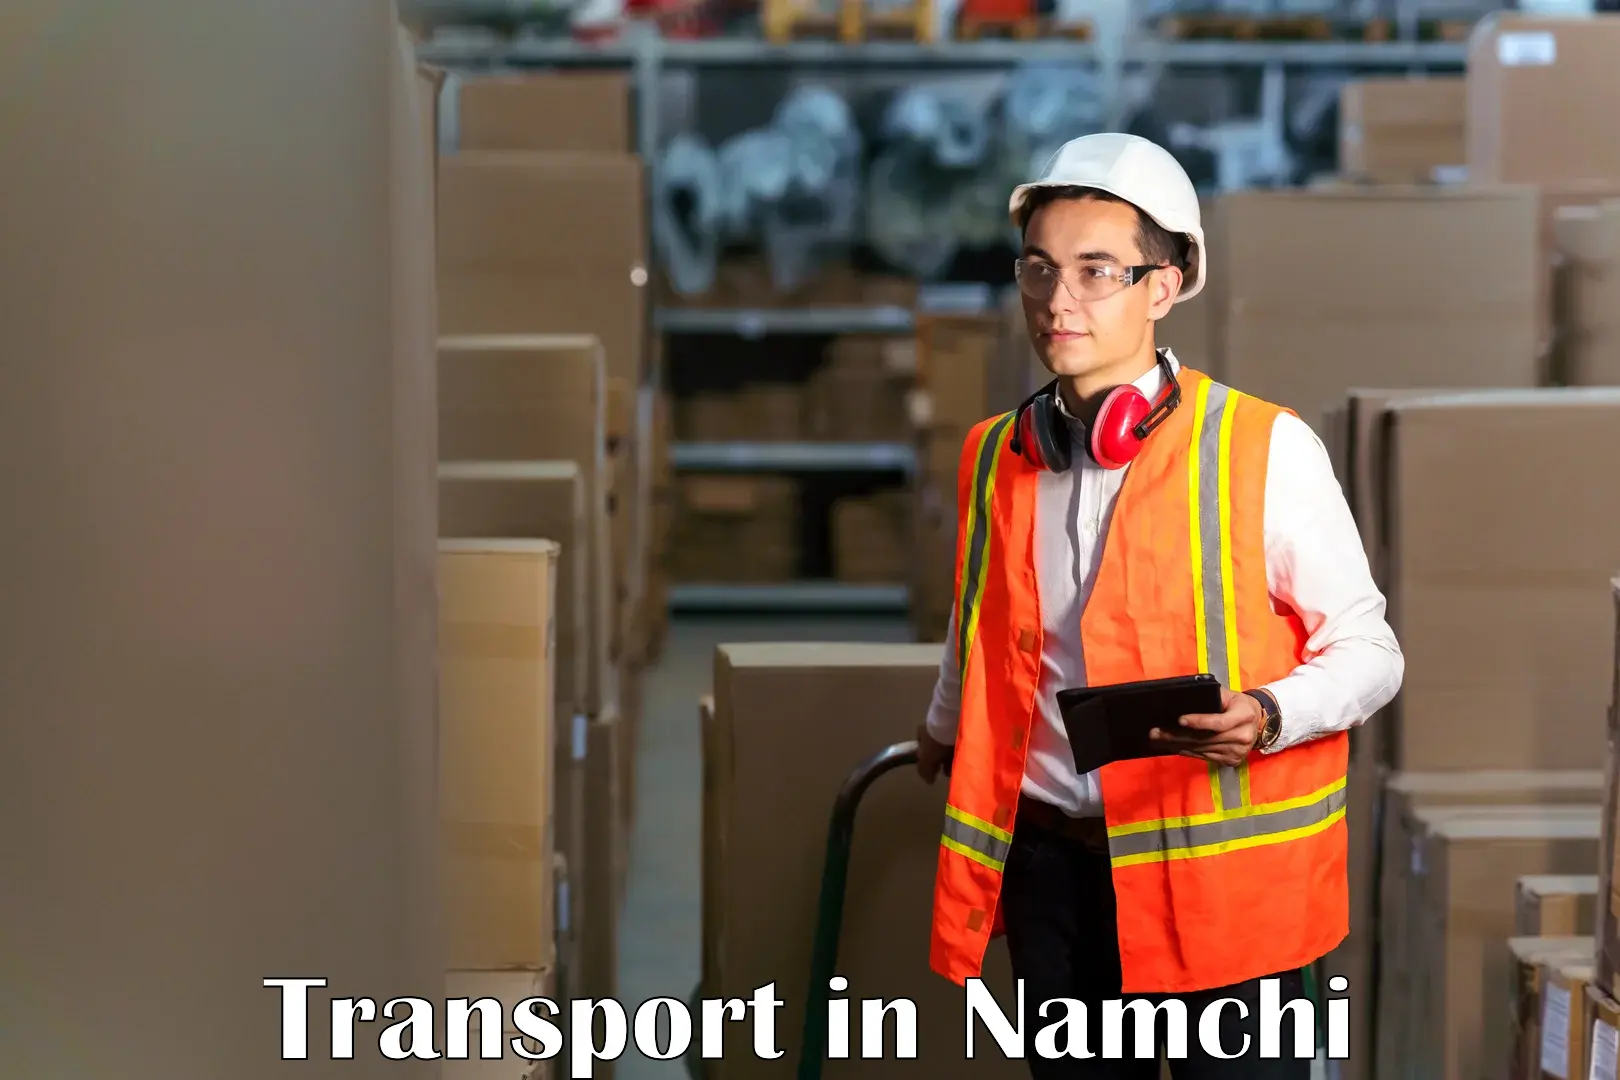 Delivery service in Namchi